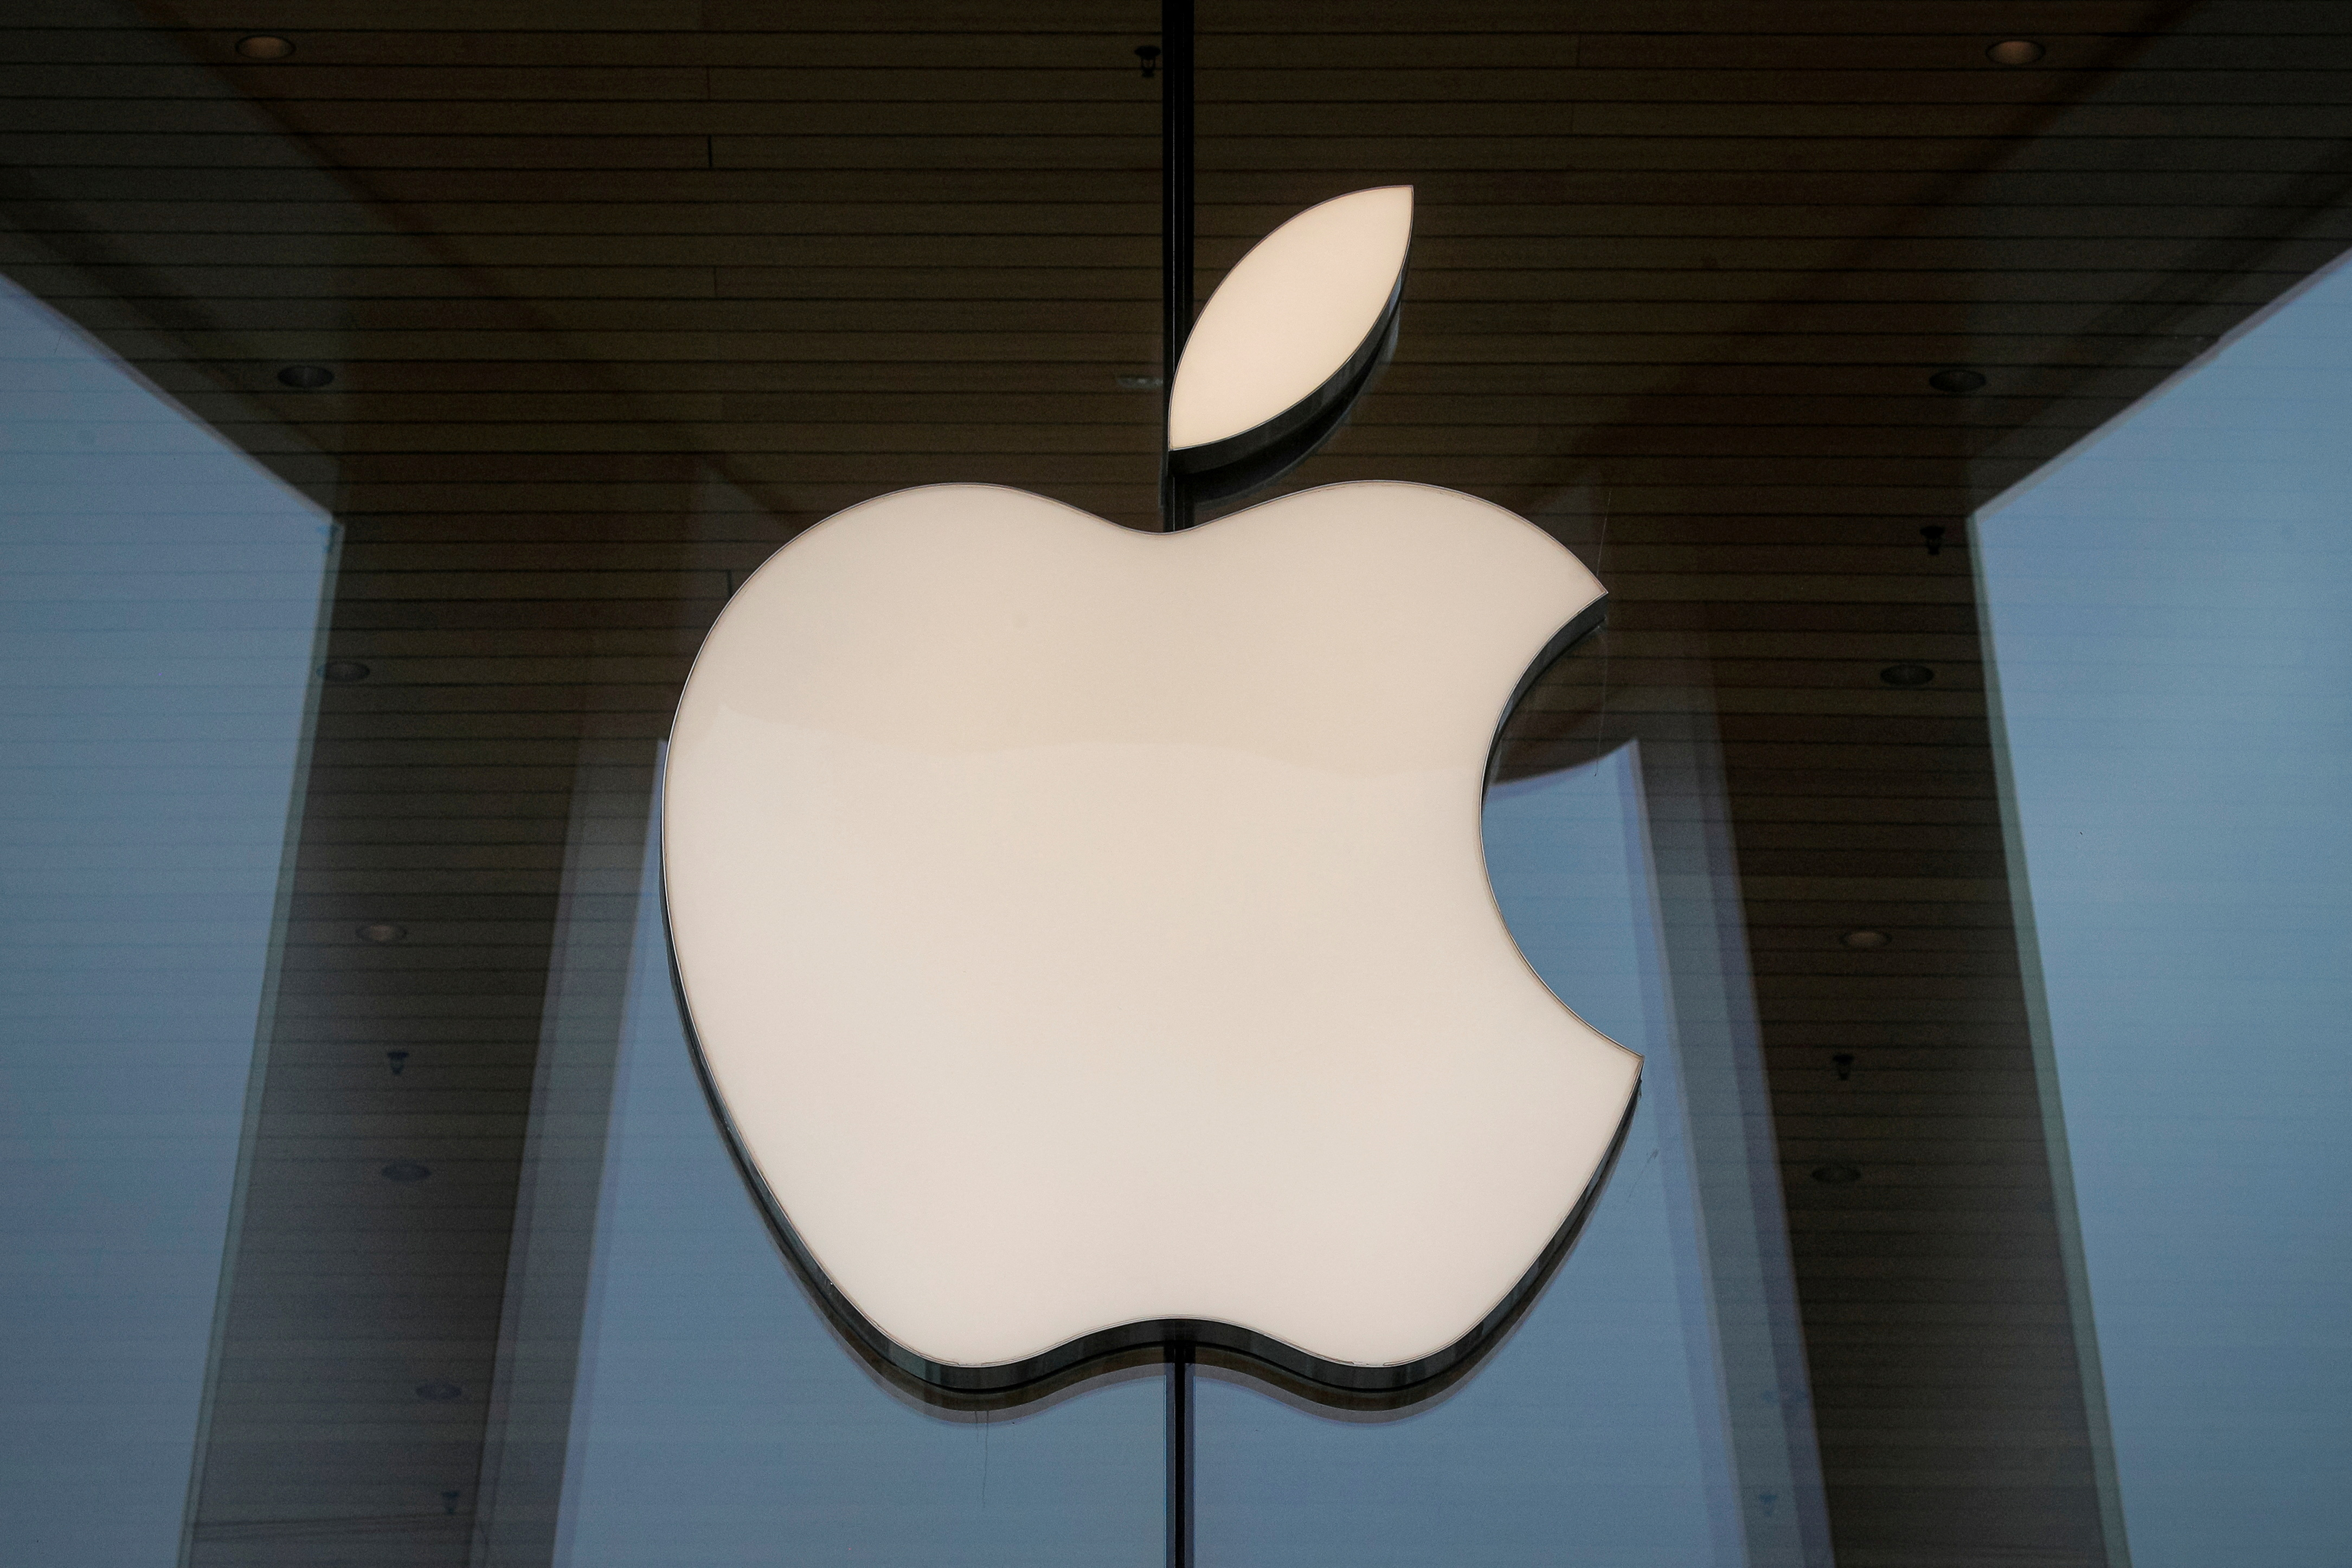 The Apple logo is seen at an Apple Store in Brooklyn, New York